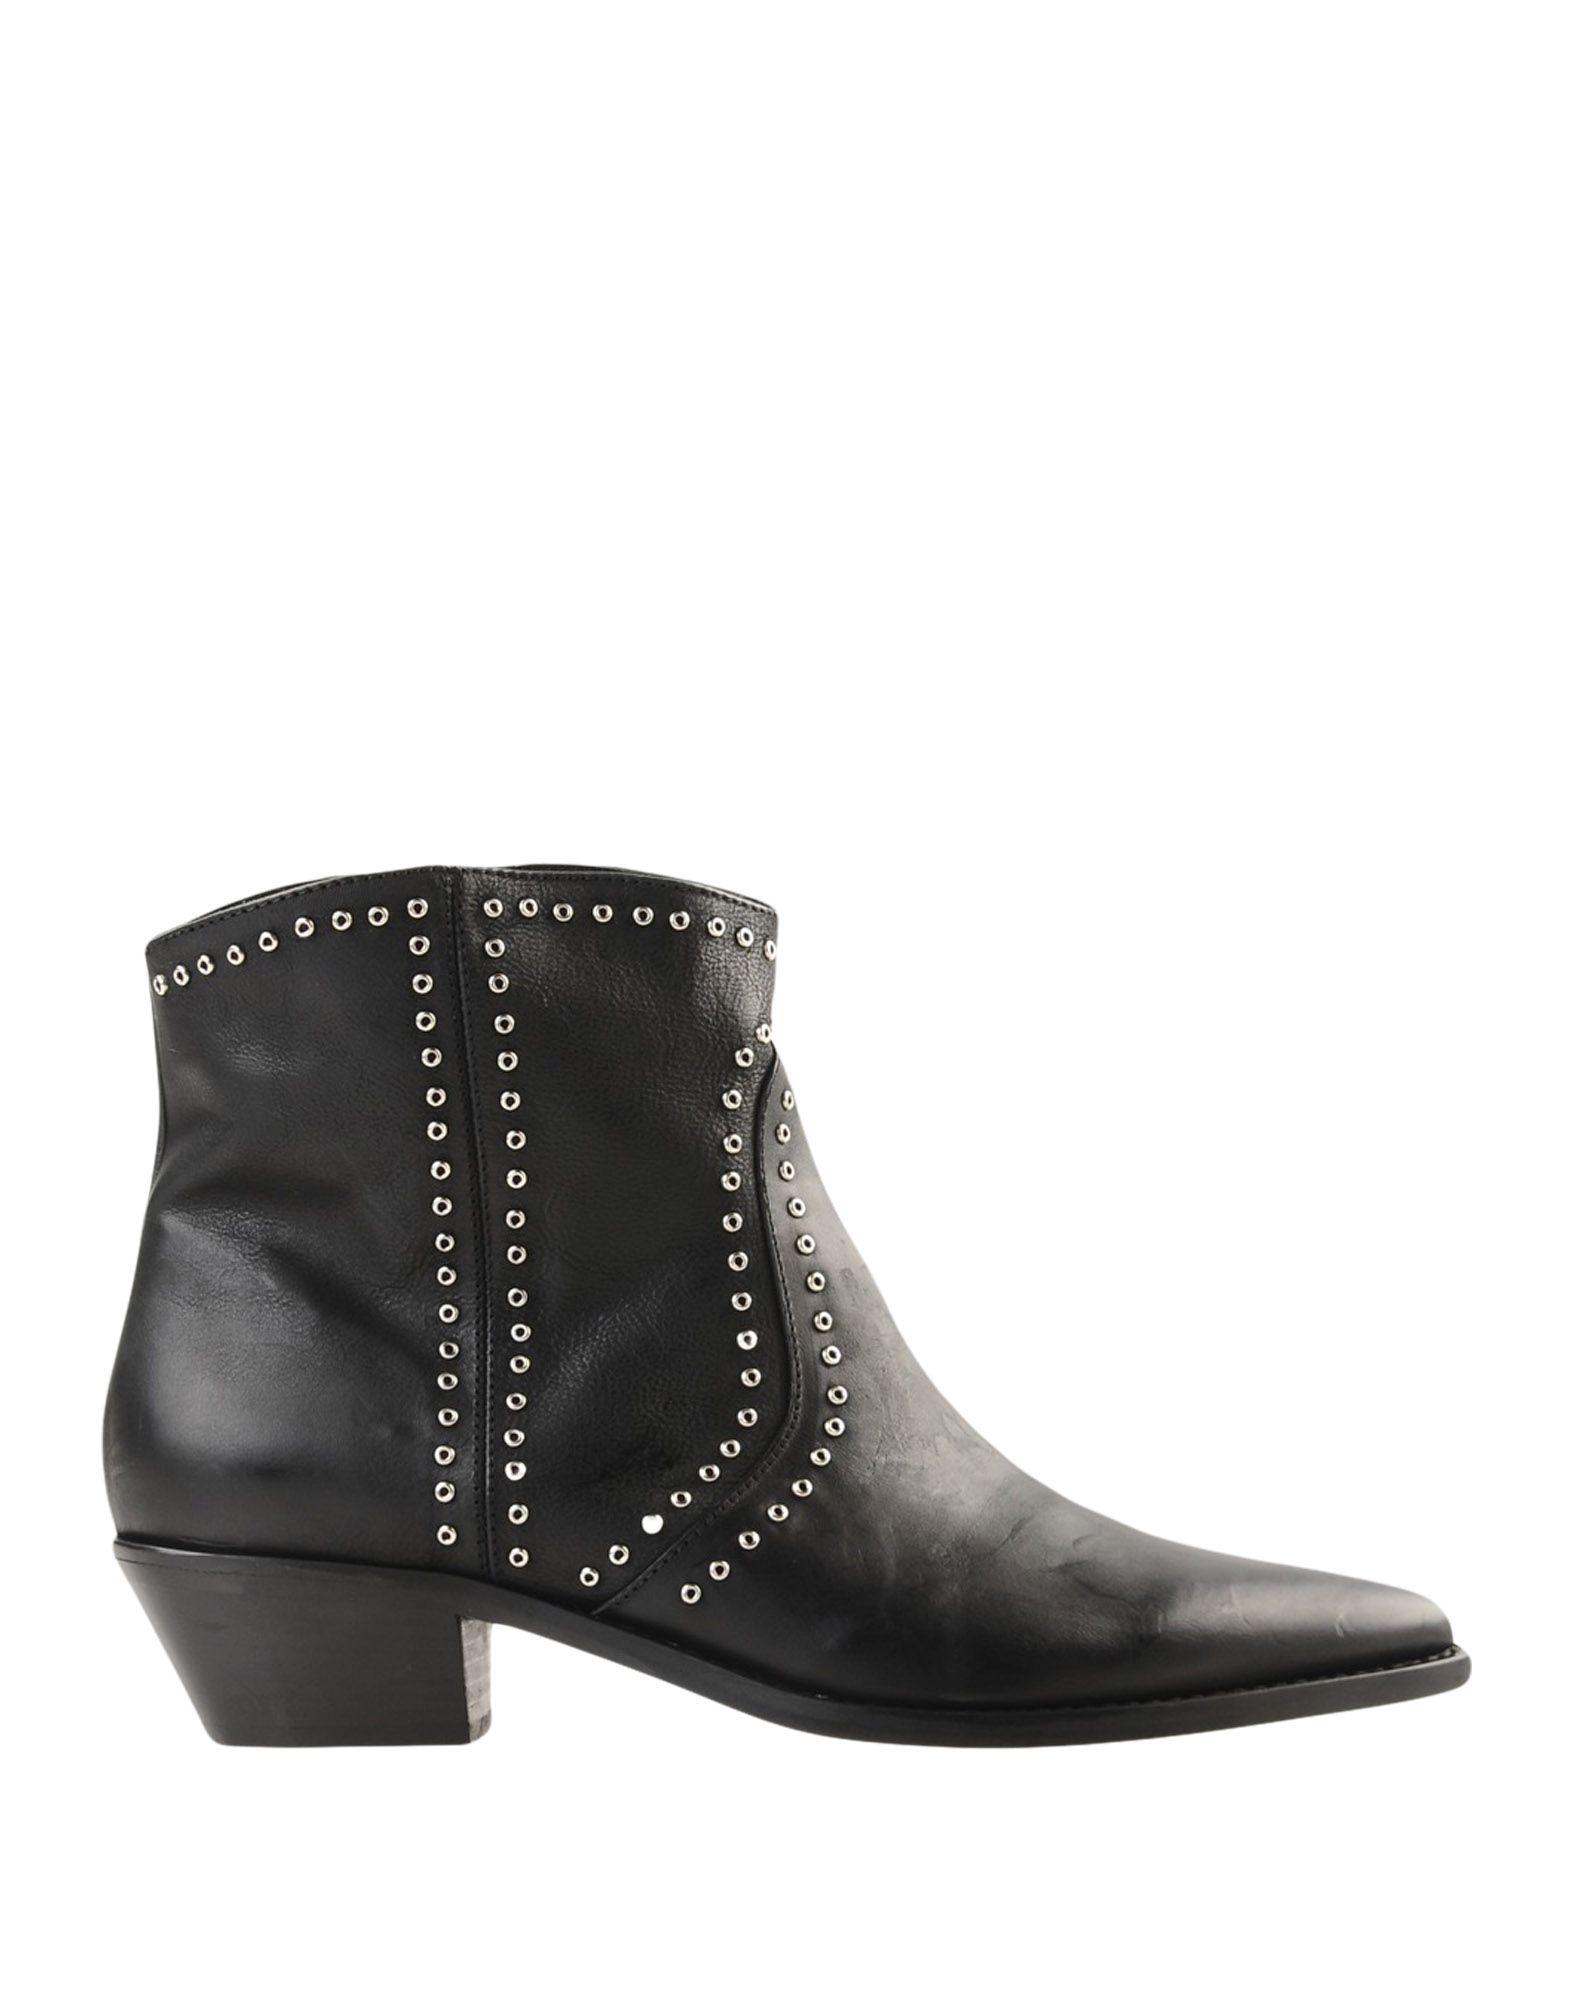 Lemarè Leather Ankle Boots in Black - Lyst